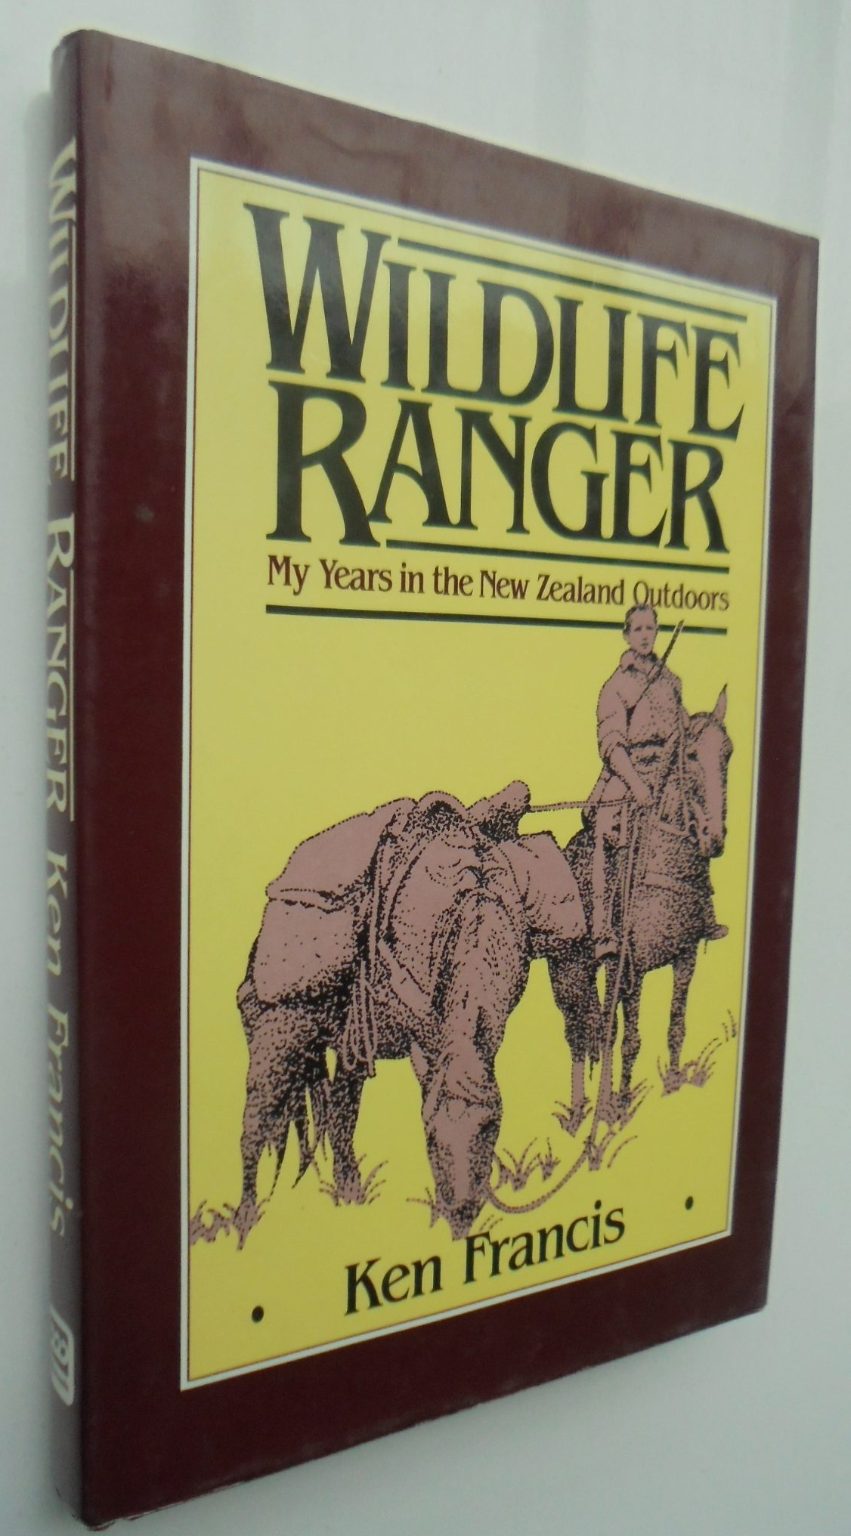 Wildlife Ranger. My Years in the New Zealand Outdoors by Ken Francis.